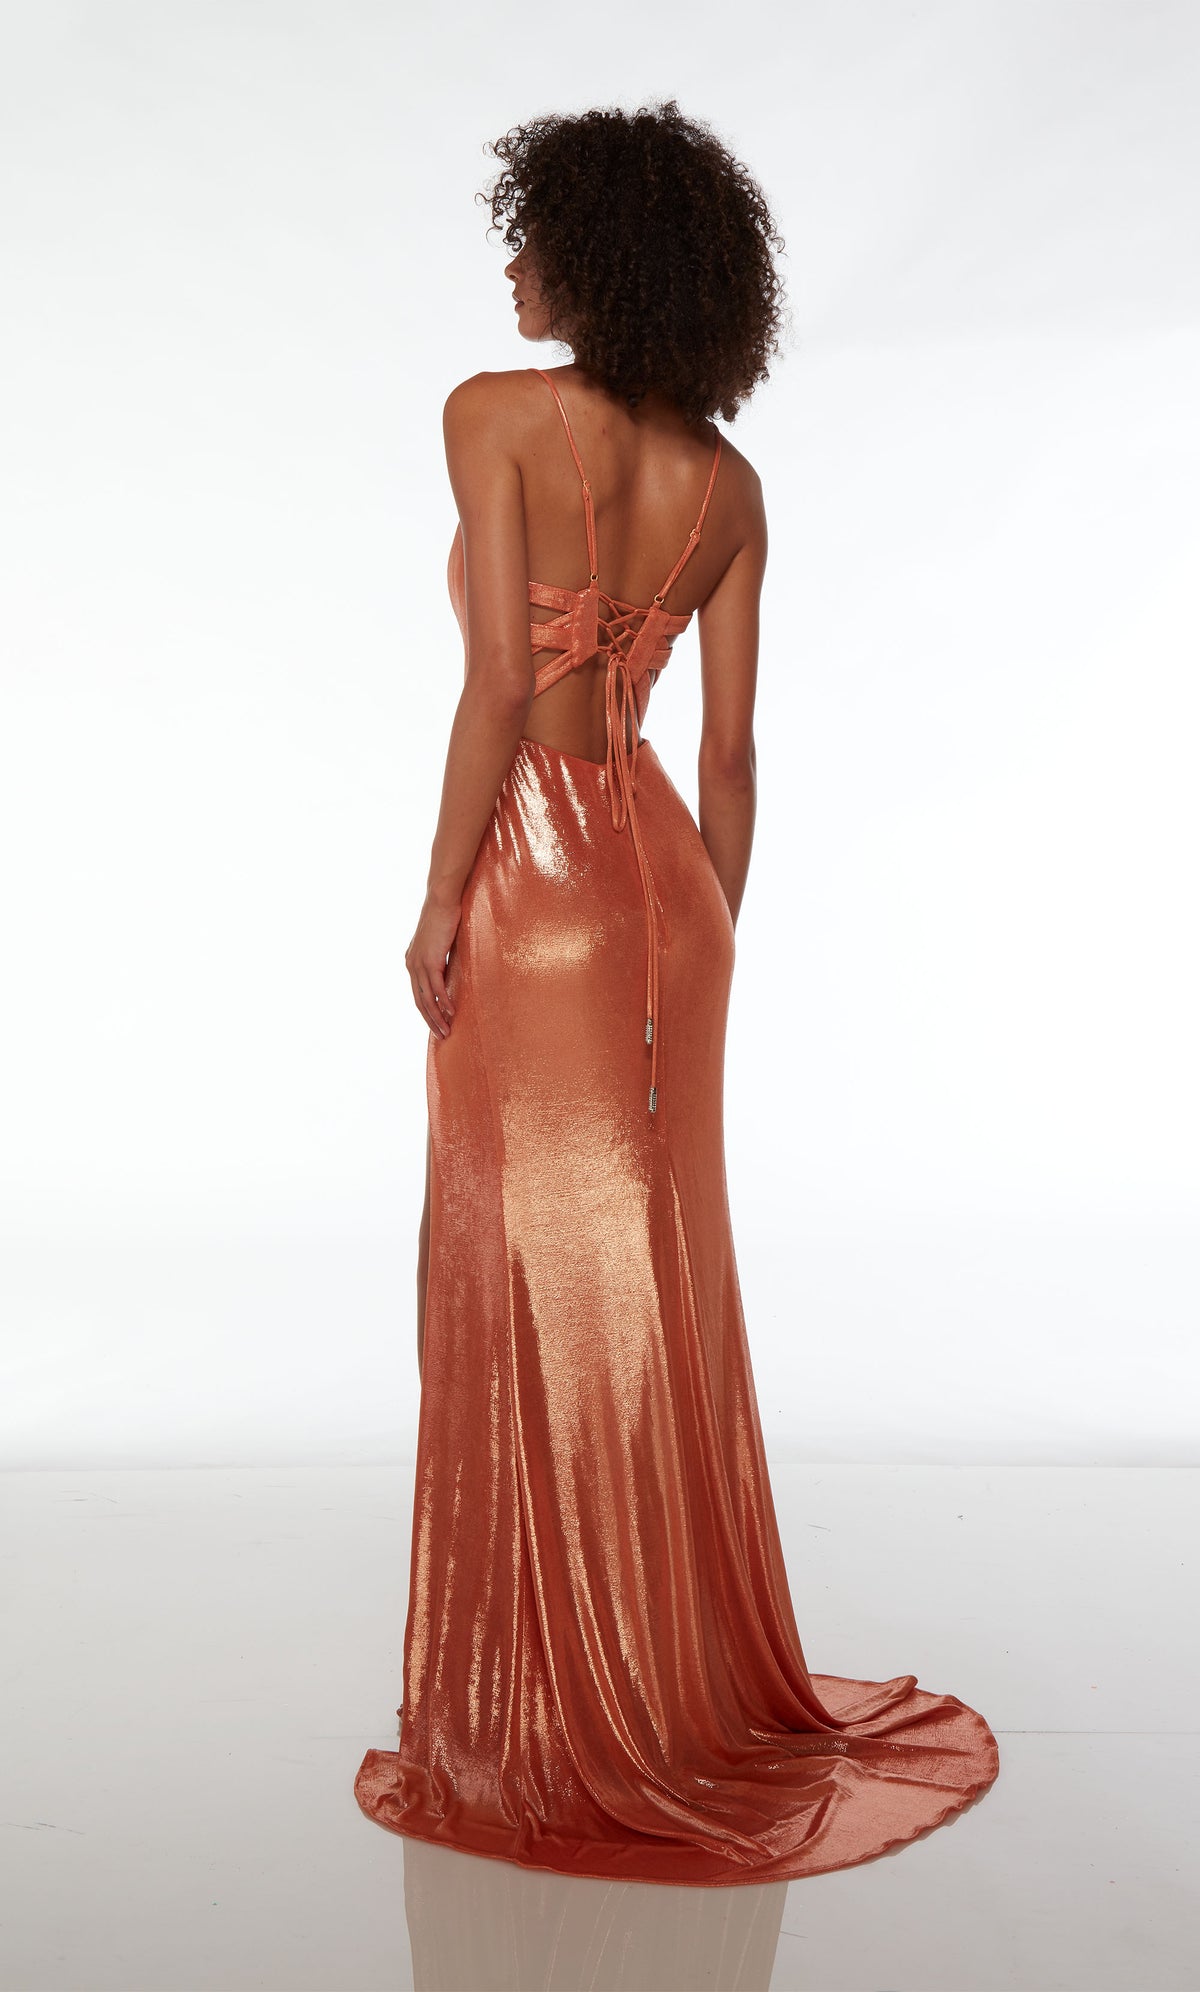 Elegant copper-colored metallic stretch formal dress with an plunging neckline, side slit, lace-up back, and an graceful train for an stylish and sophisticated look.